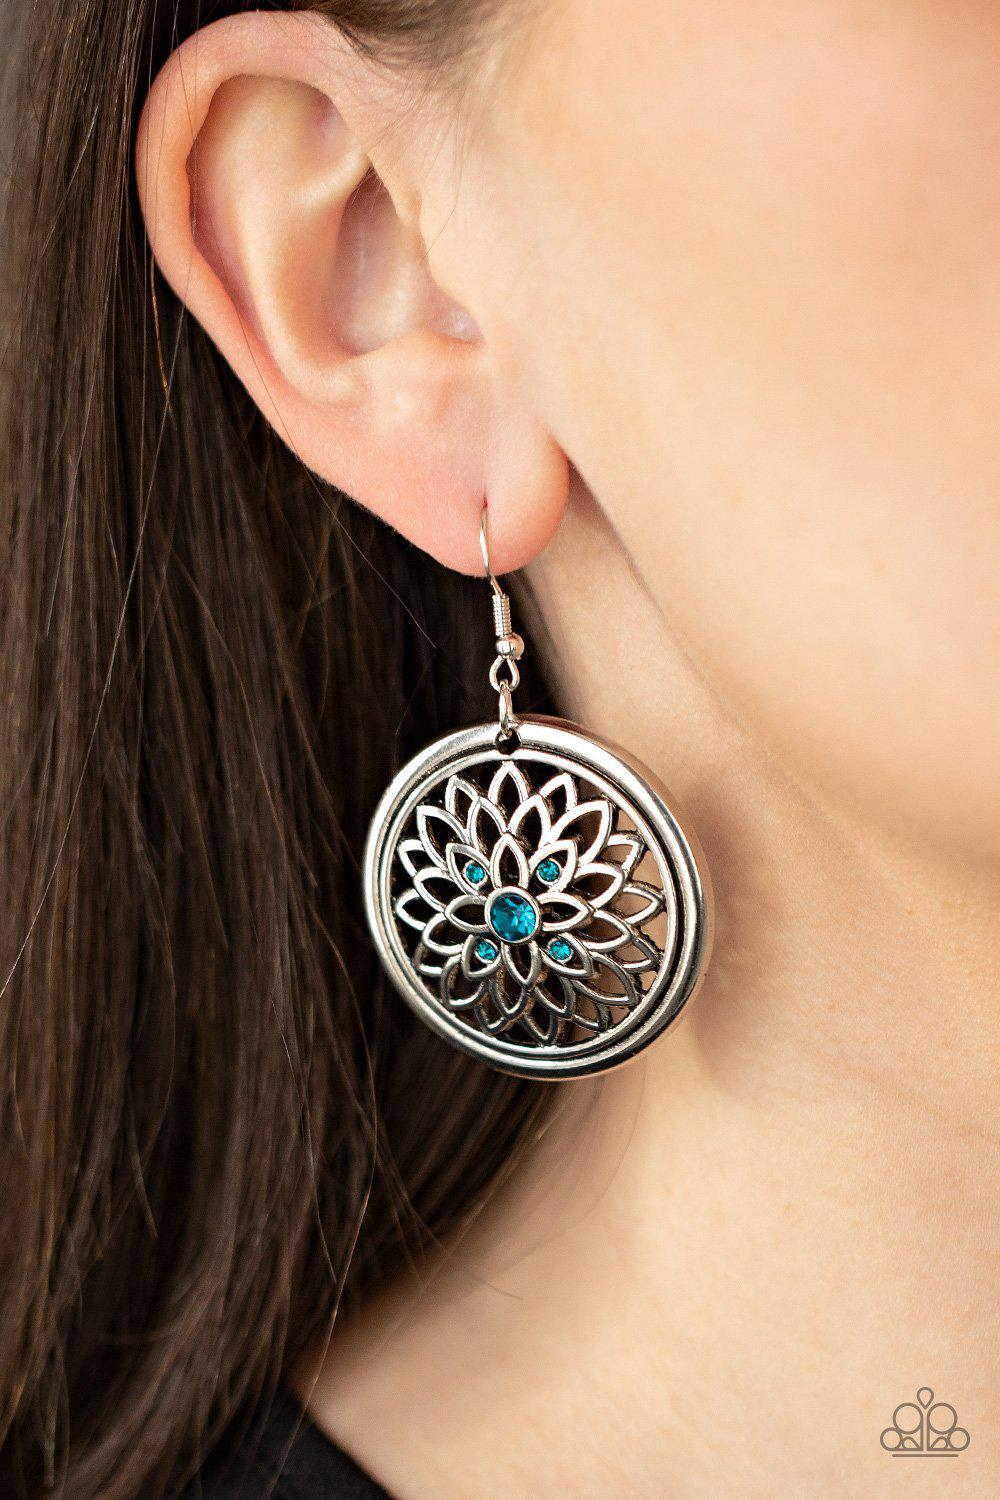 Mega Medallions Blue Rhinestone and Silver Filigree Earrings - Paparazzi Accessories- lightbox - CarasShop.com - $5 Jewelry by Cara Jewels